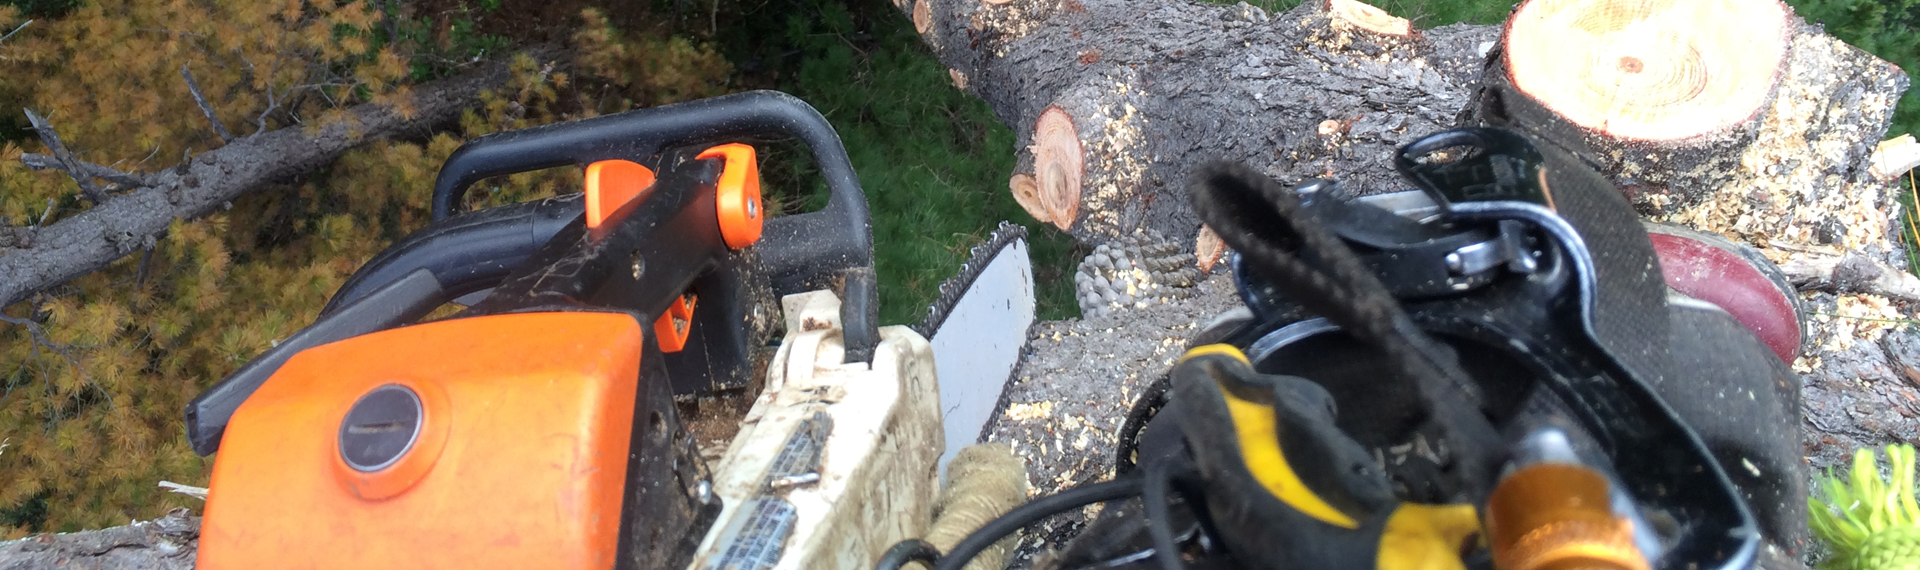 chain saw and equipment